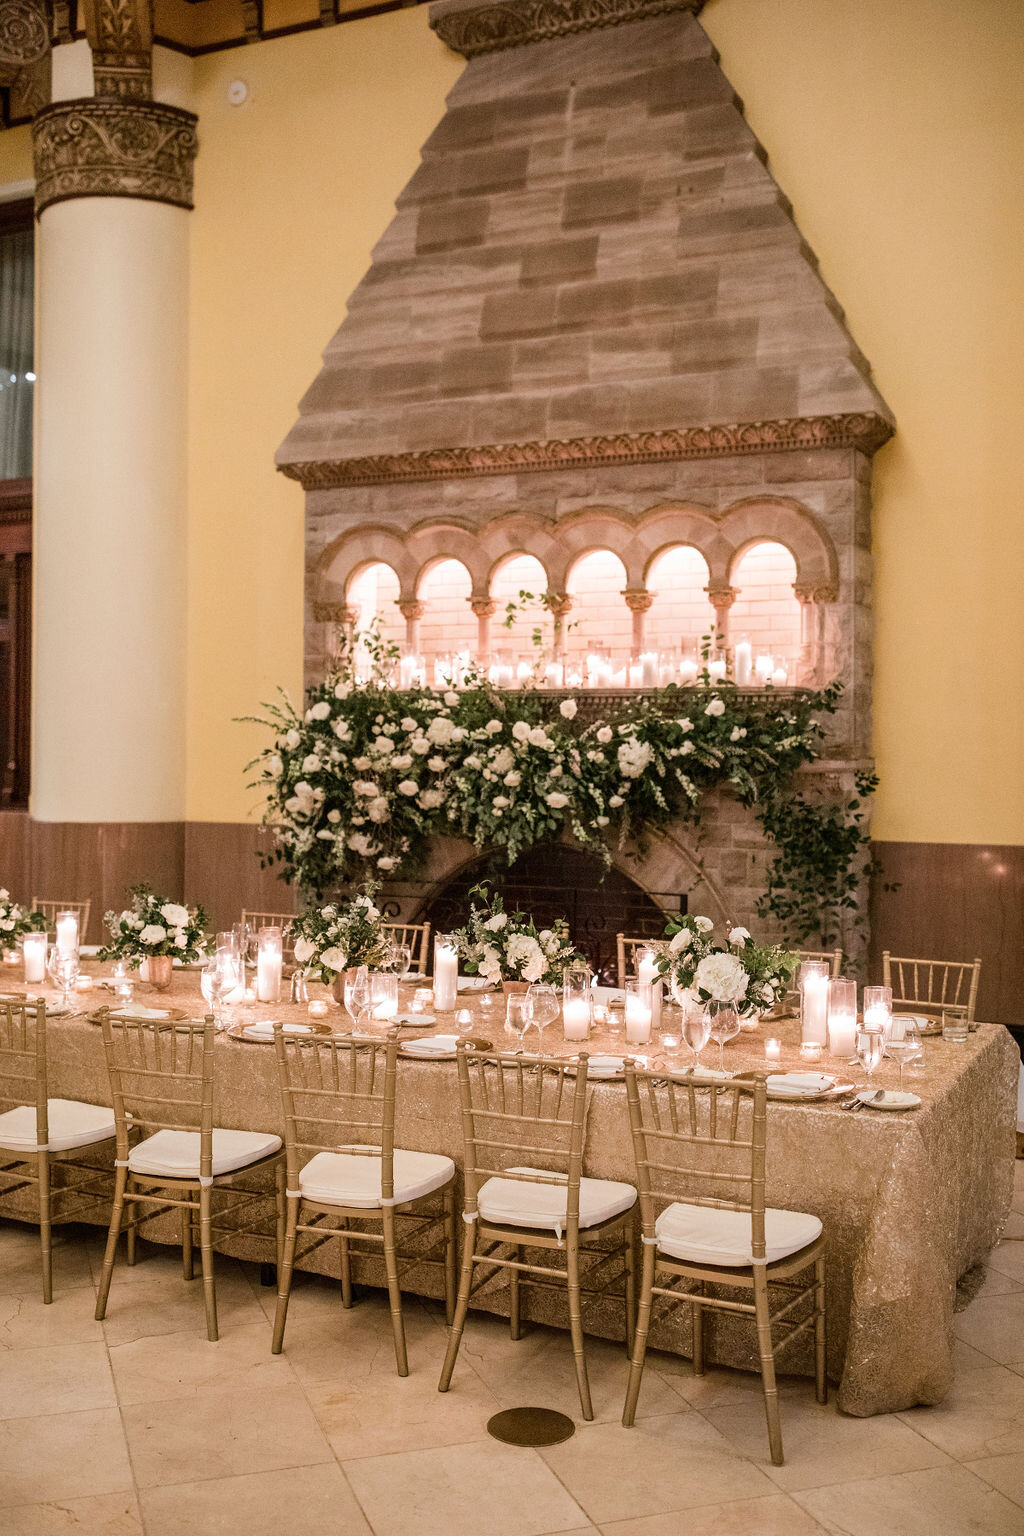 Lush fireplace mantle floral installation with all white garden roses, hydrangeas, and ranunculus with natural, untamed greenery and eucalyptus. Head table backdrop. Nashville floral designer, Rosemary & Finch, for a wedding at Union Station.